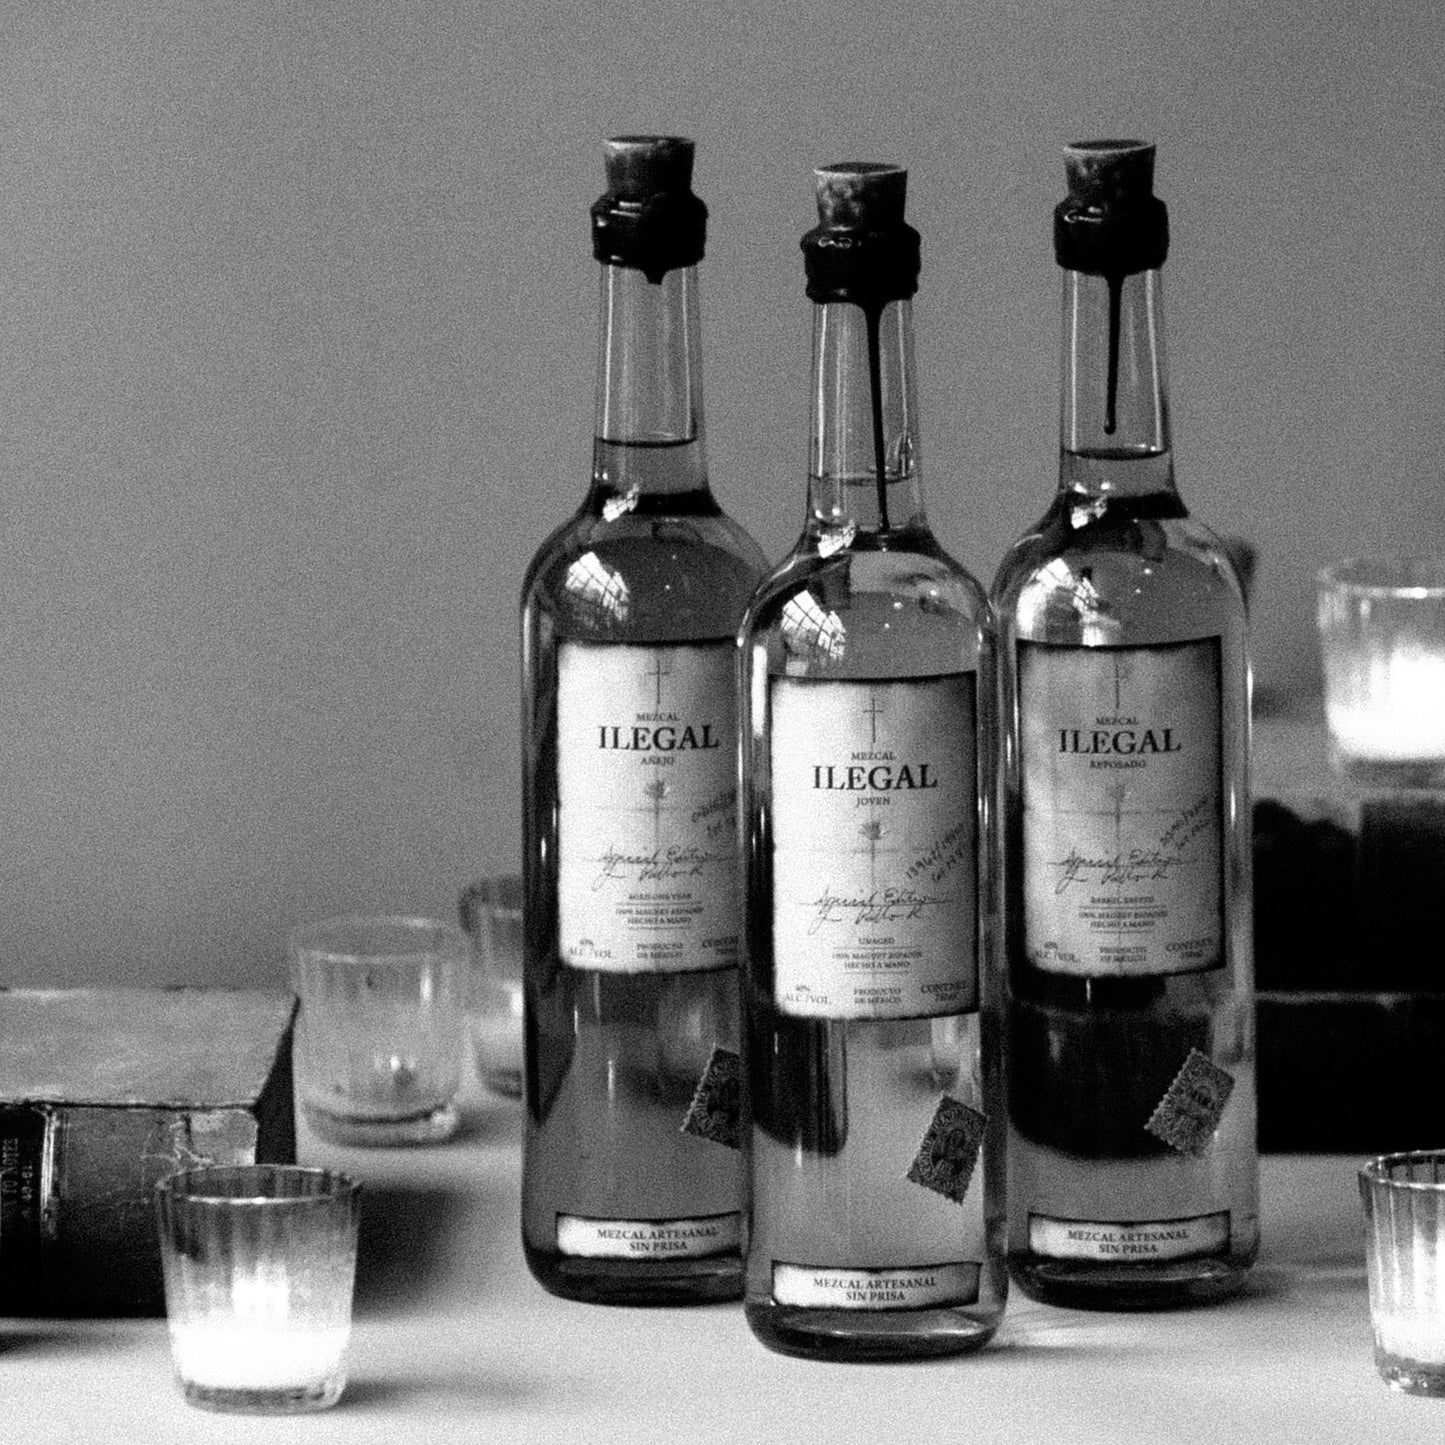 The Ilegal Mezcal Collection